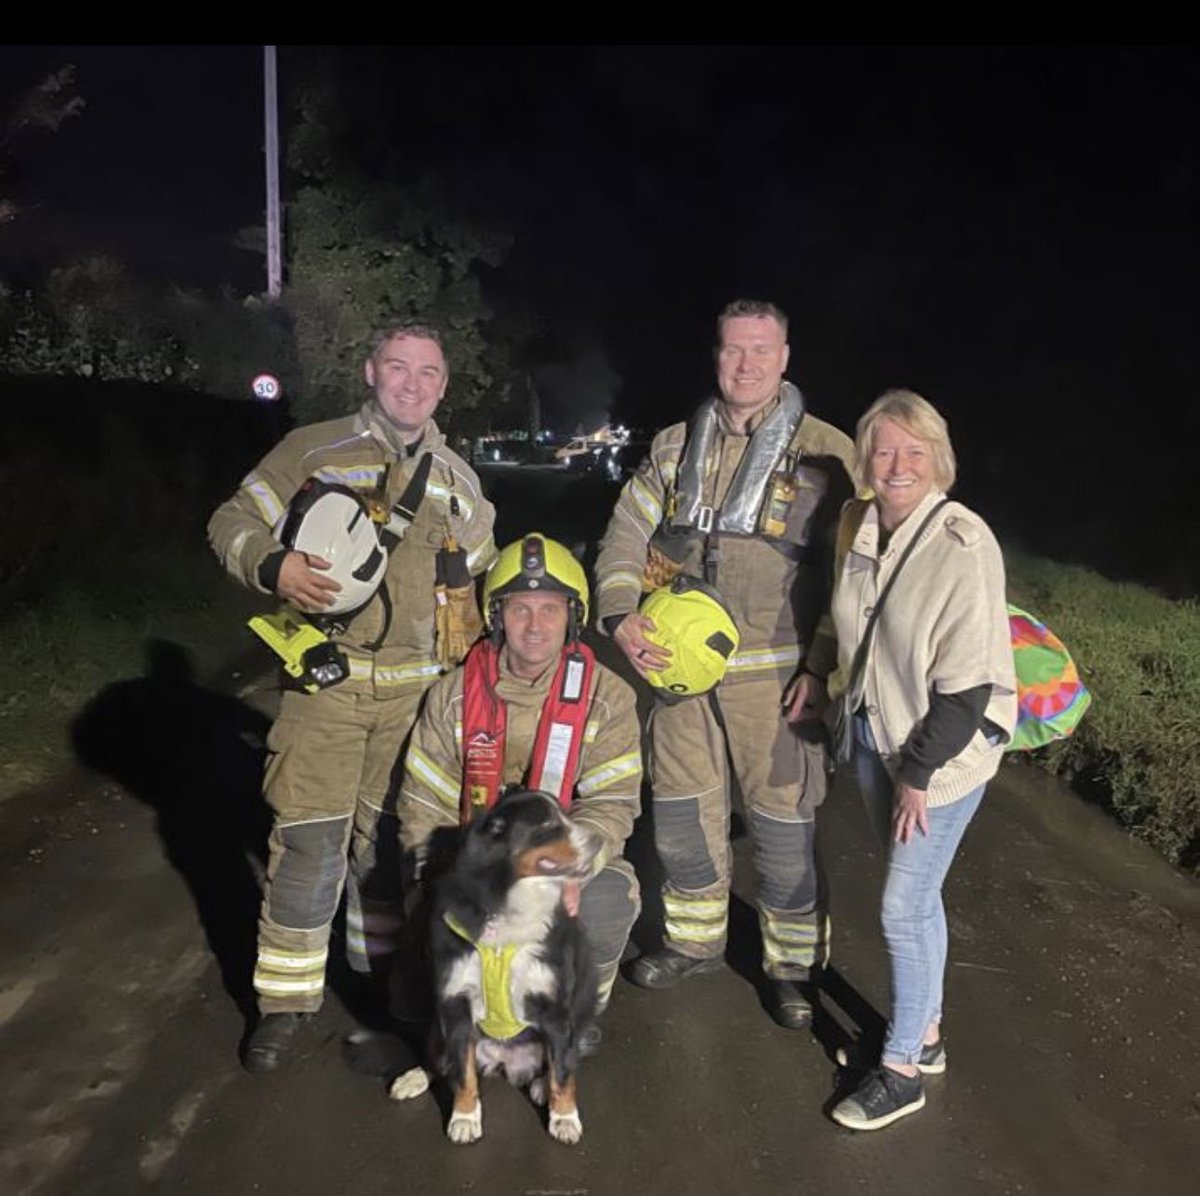 Crews fortunately rescued Bella the 🐶and her owner from floodwater 🚒 Remember, appearances can deceive – water may be deeper and swifter than it seems. Worried about floods near you? Reach out to Floodline at 0345 988 1188 for advice. 🌊 #SafetyFirst #FloodAware @WestMidsFire